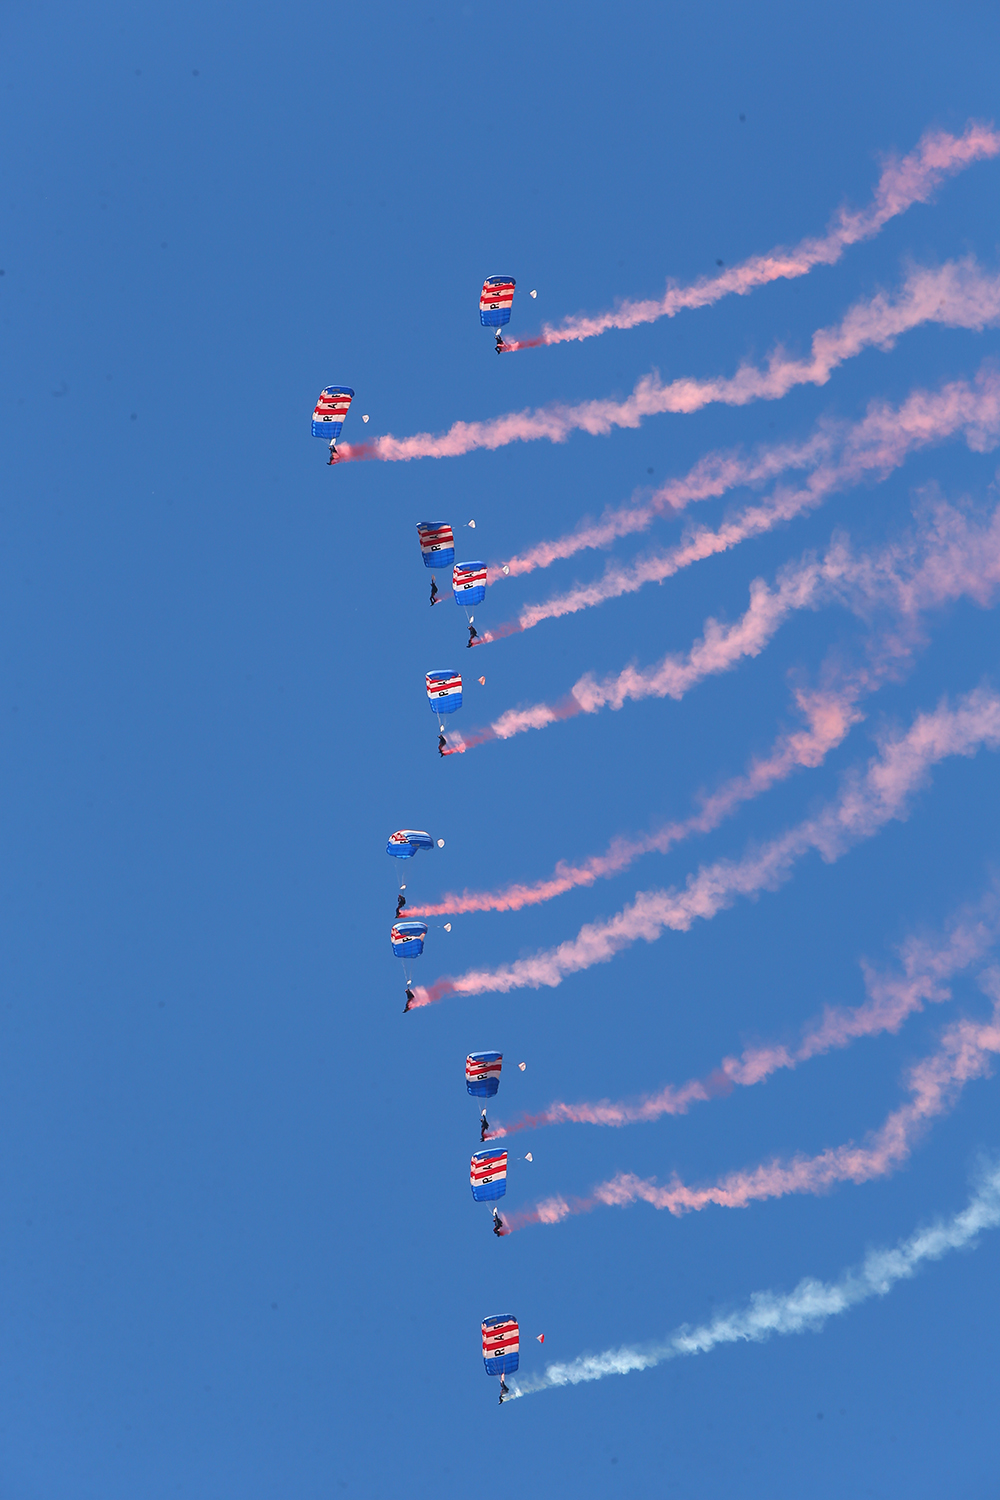 The RAF Falcons perform their famous non-contact canopy stack 